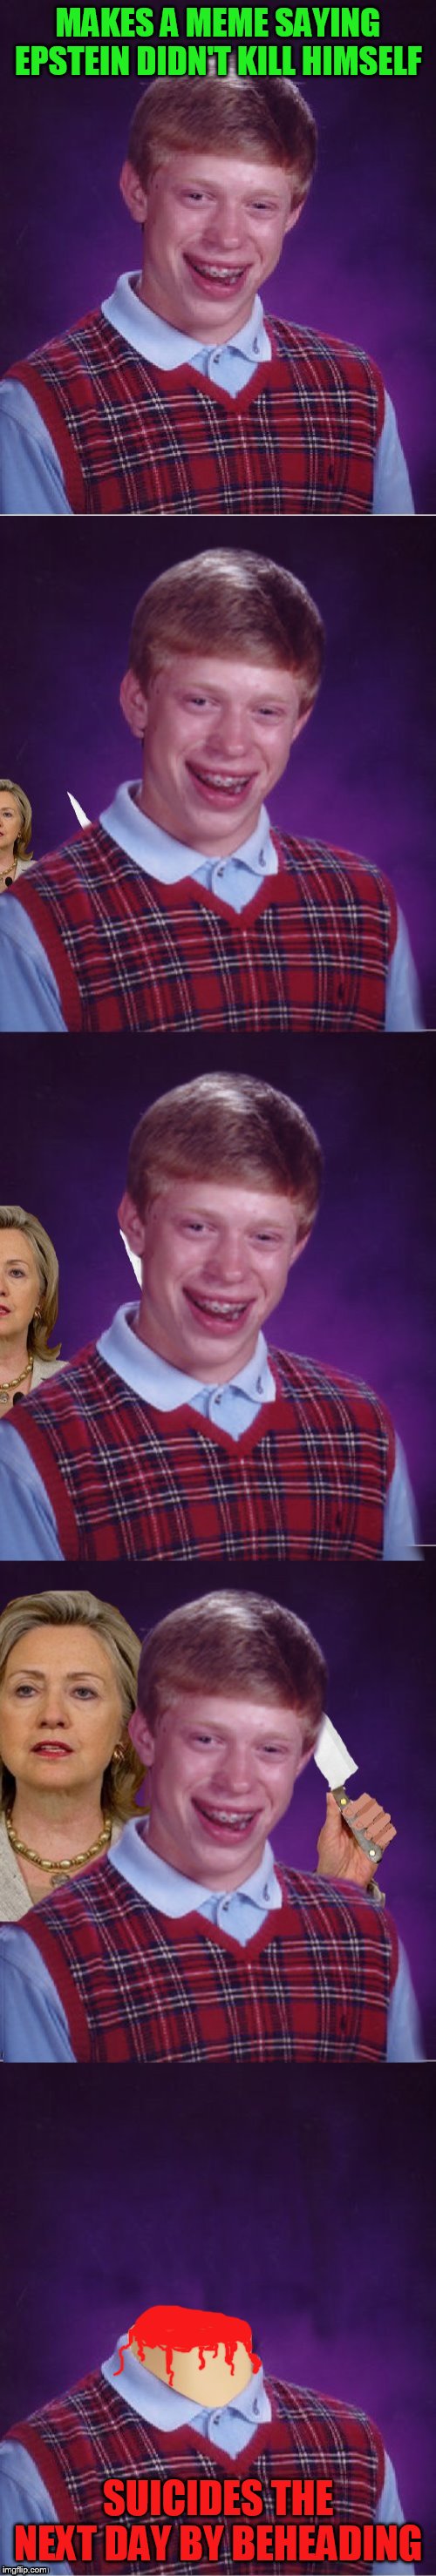 She's making a list,She's checking it twice,She's gonna find out who's naughty or nice,Hillary is coming to town | MAKES A MEME SAYING EPSTEIN DIDN'T KILL HIMSELF; SUICIDES THE NEXT DAY BY BEHEADING | image tagged in memes,bad luck brian,jeffrey epstein,hillary clinton,suicide,funny memes | made w/ Imgflip meme maker